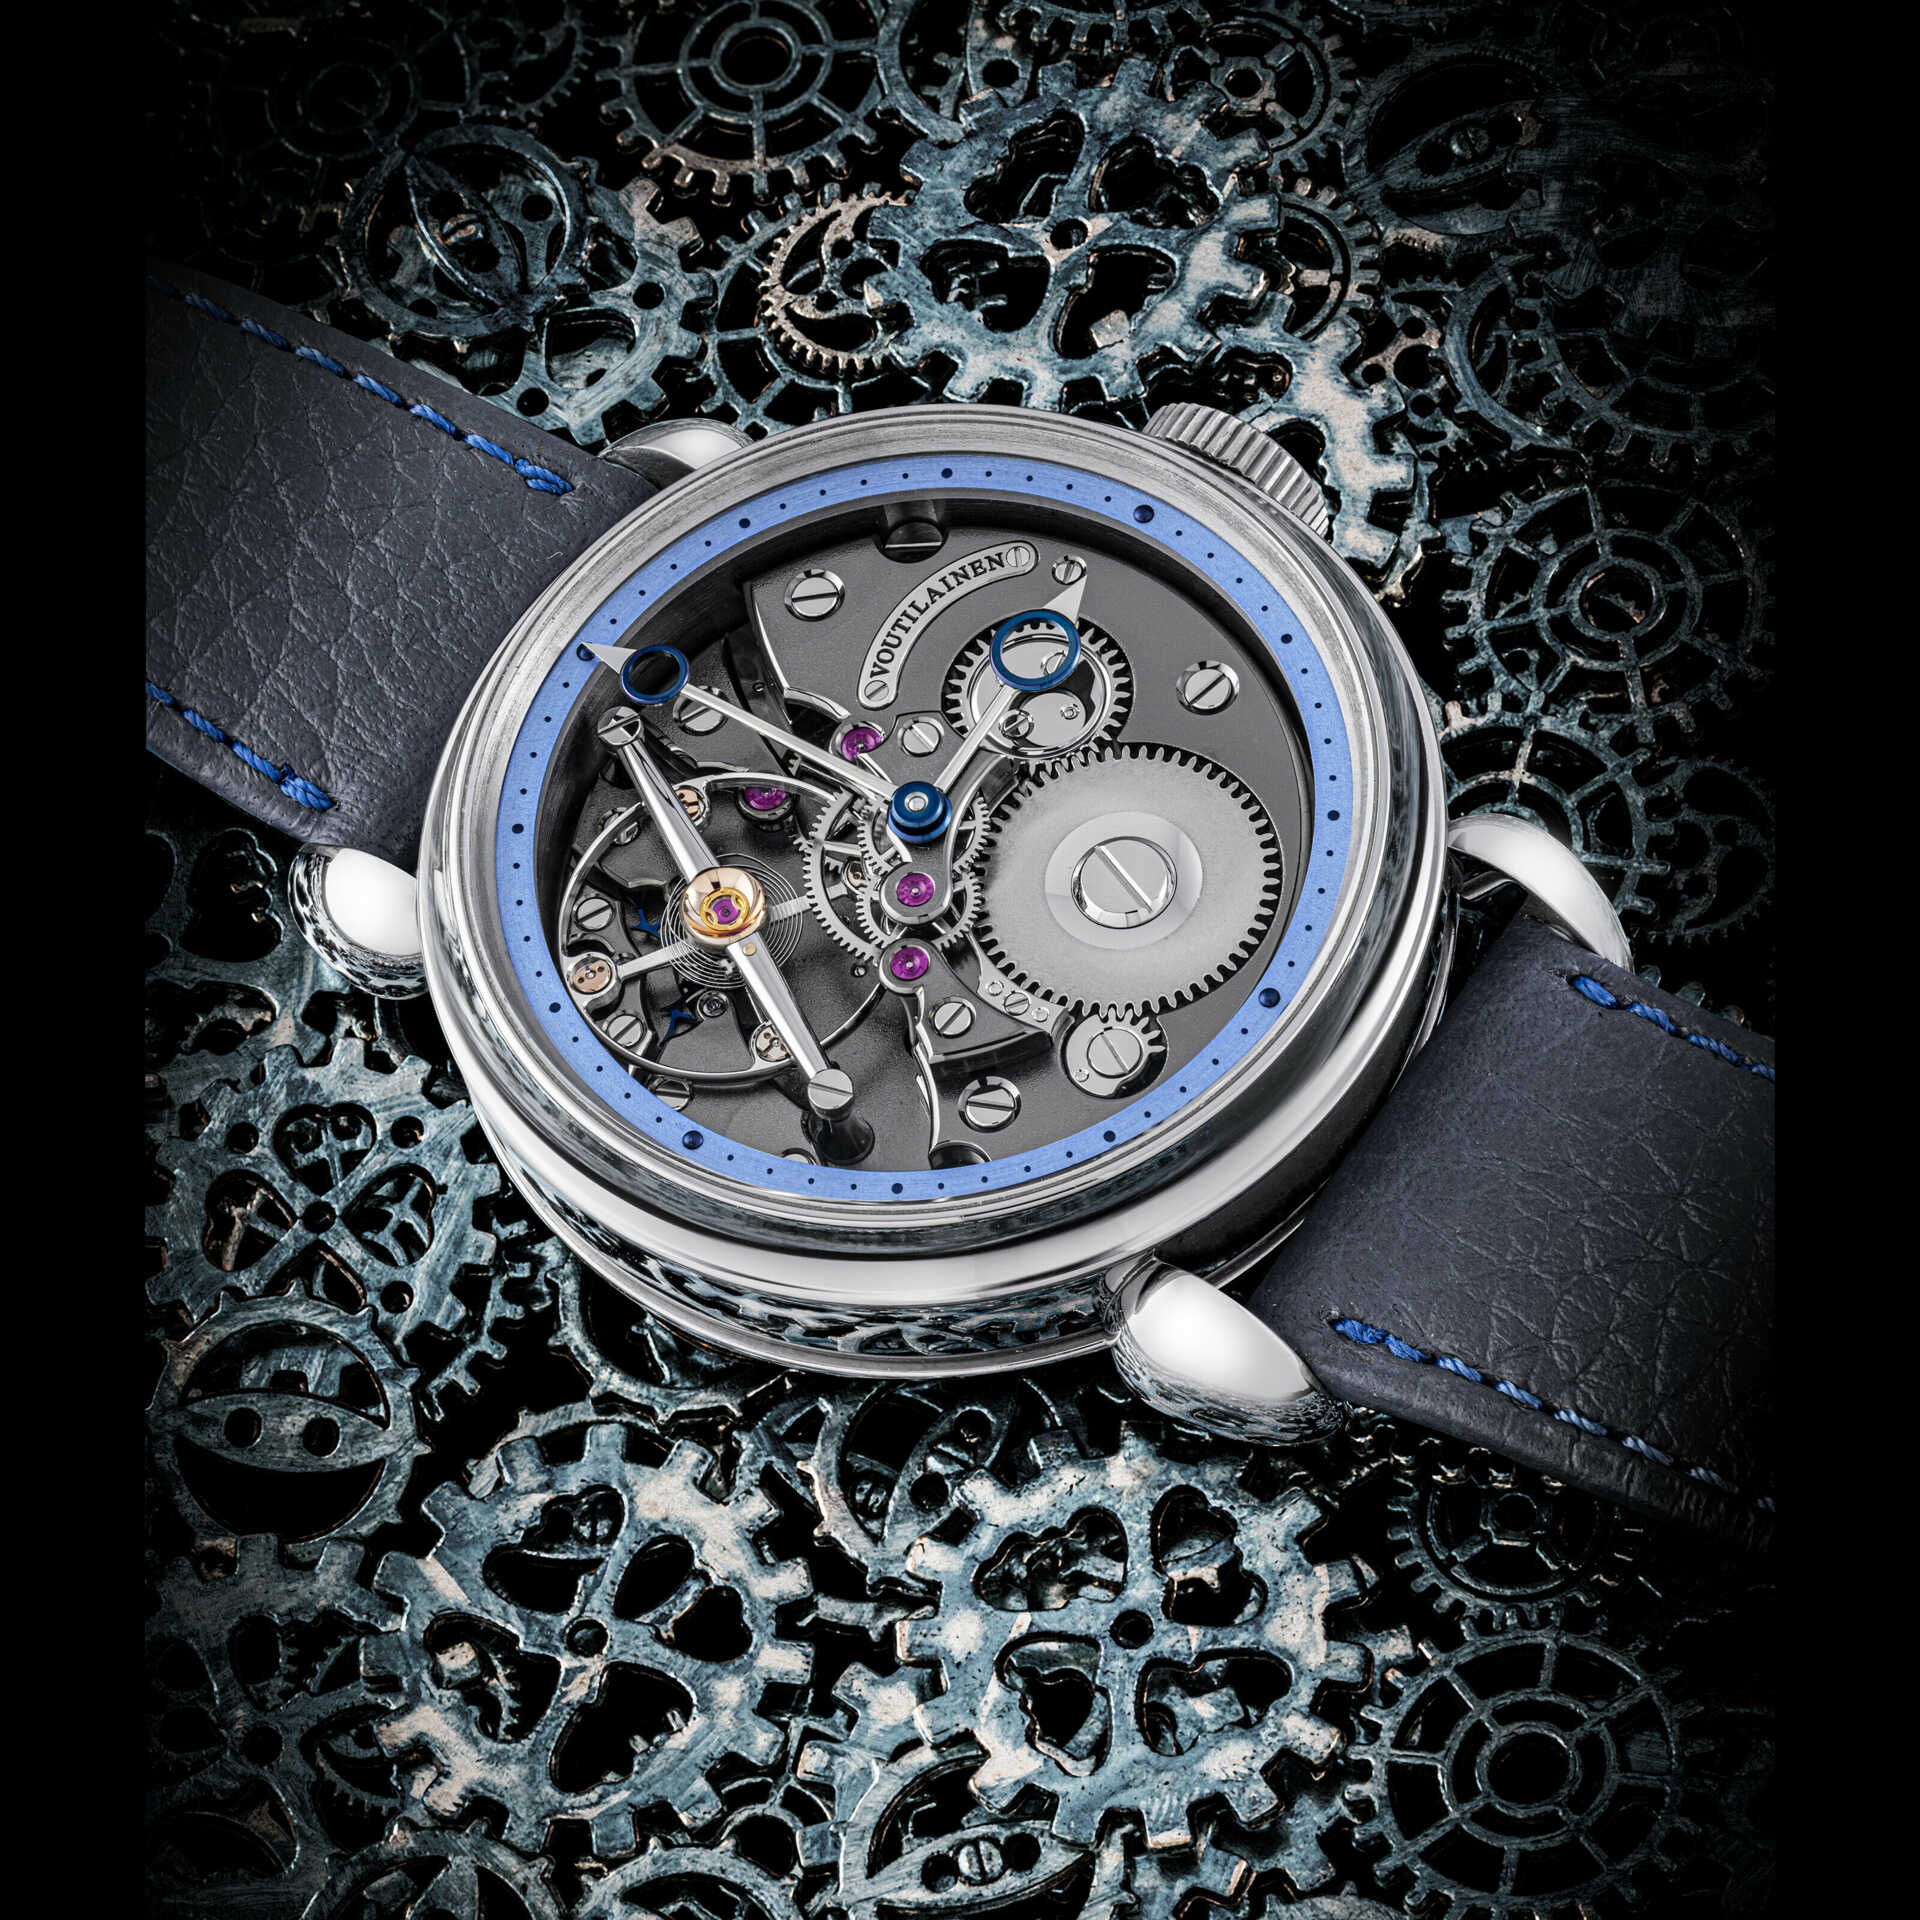 VOUTILAINEN. A VERY RARE TANTALUM LIMITED EDITION SEMI-SKELETONISED WRISTWATCH WITH POWER RESERVE